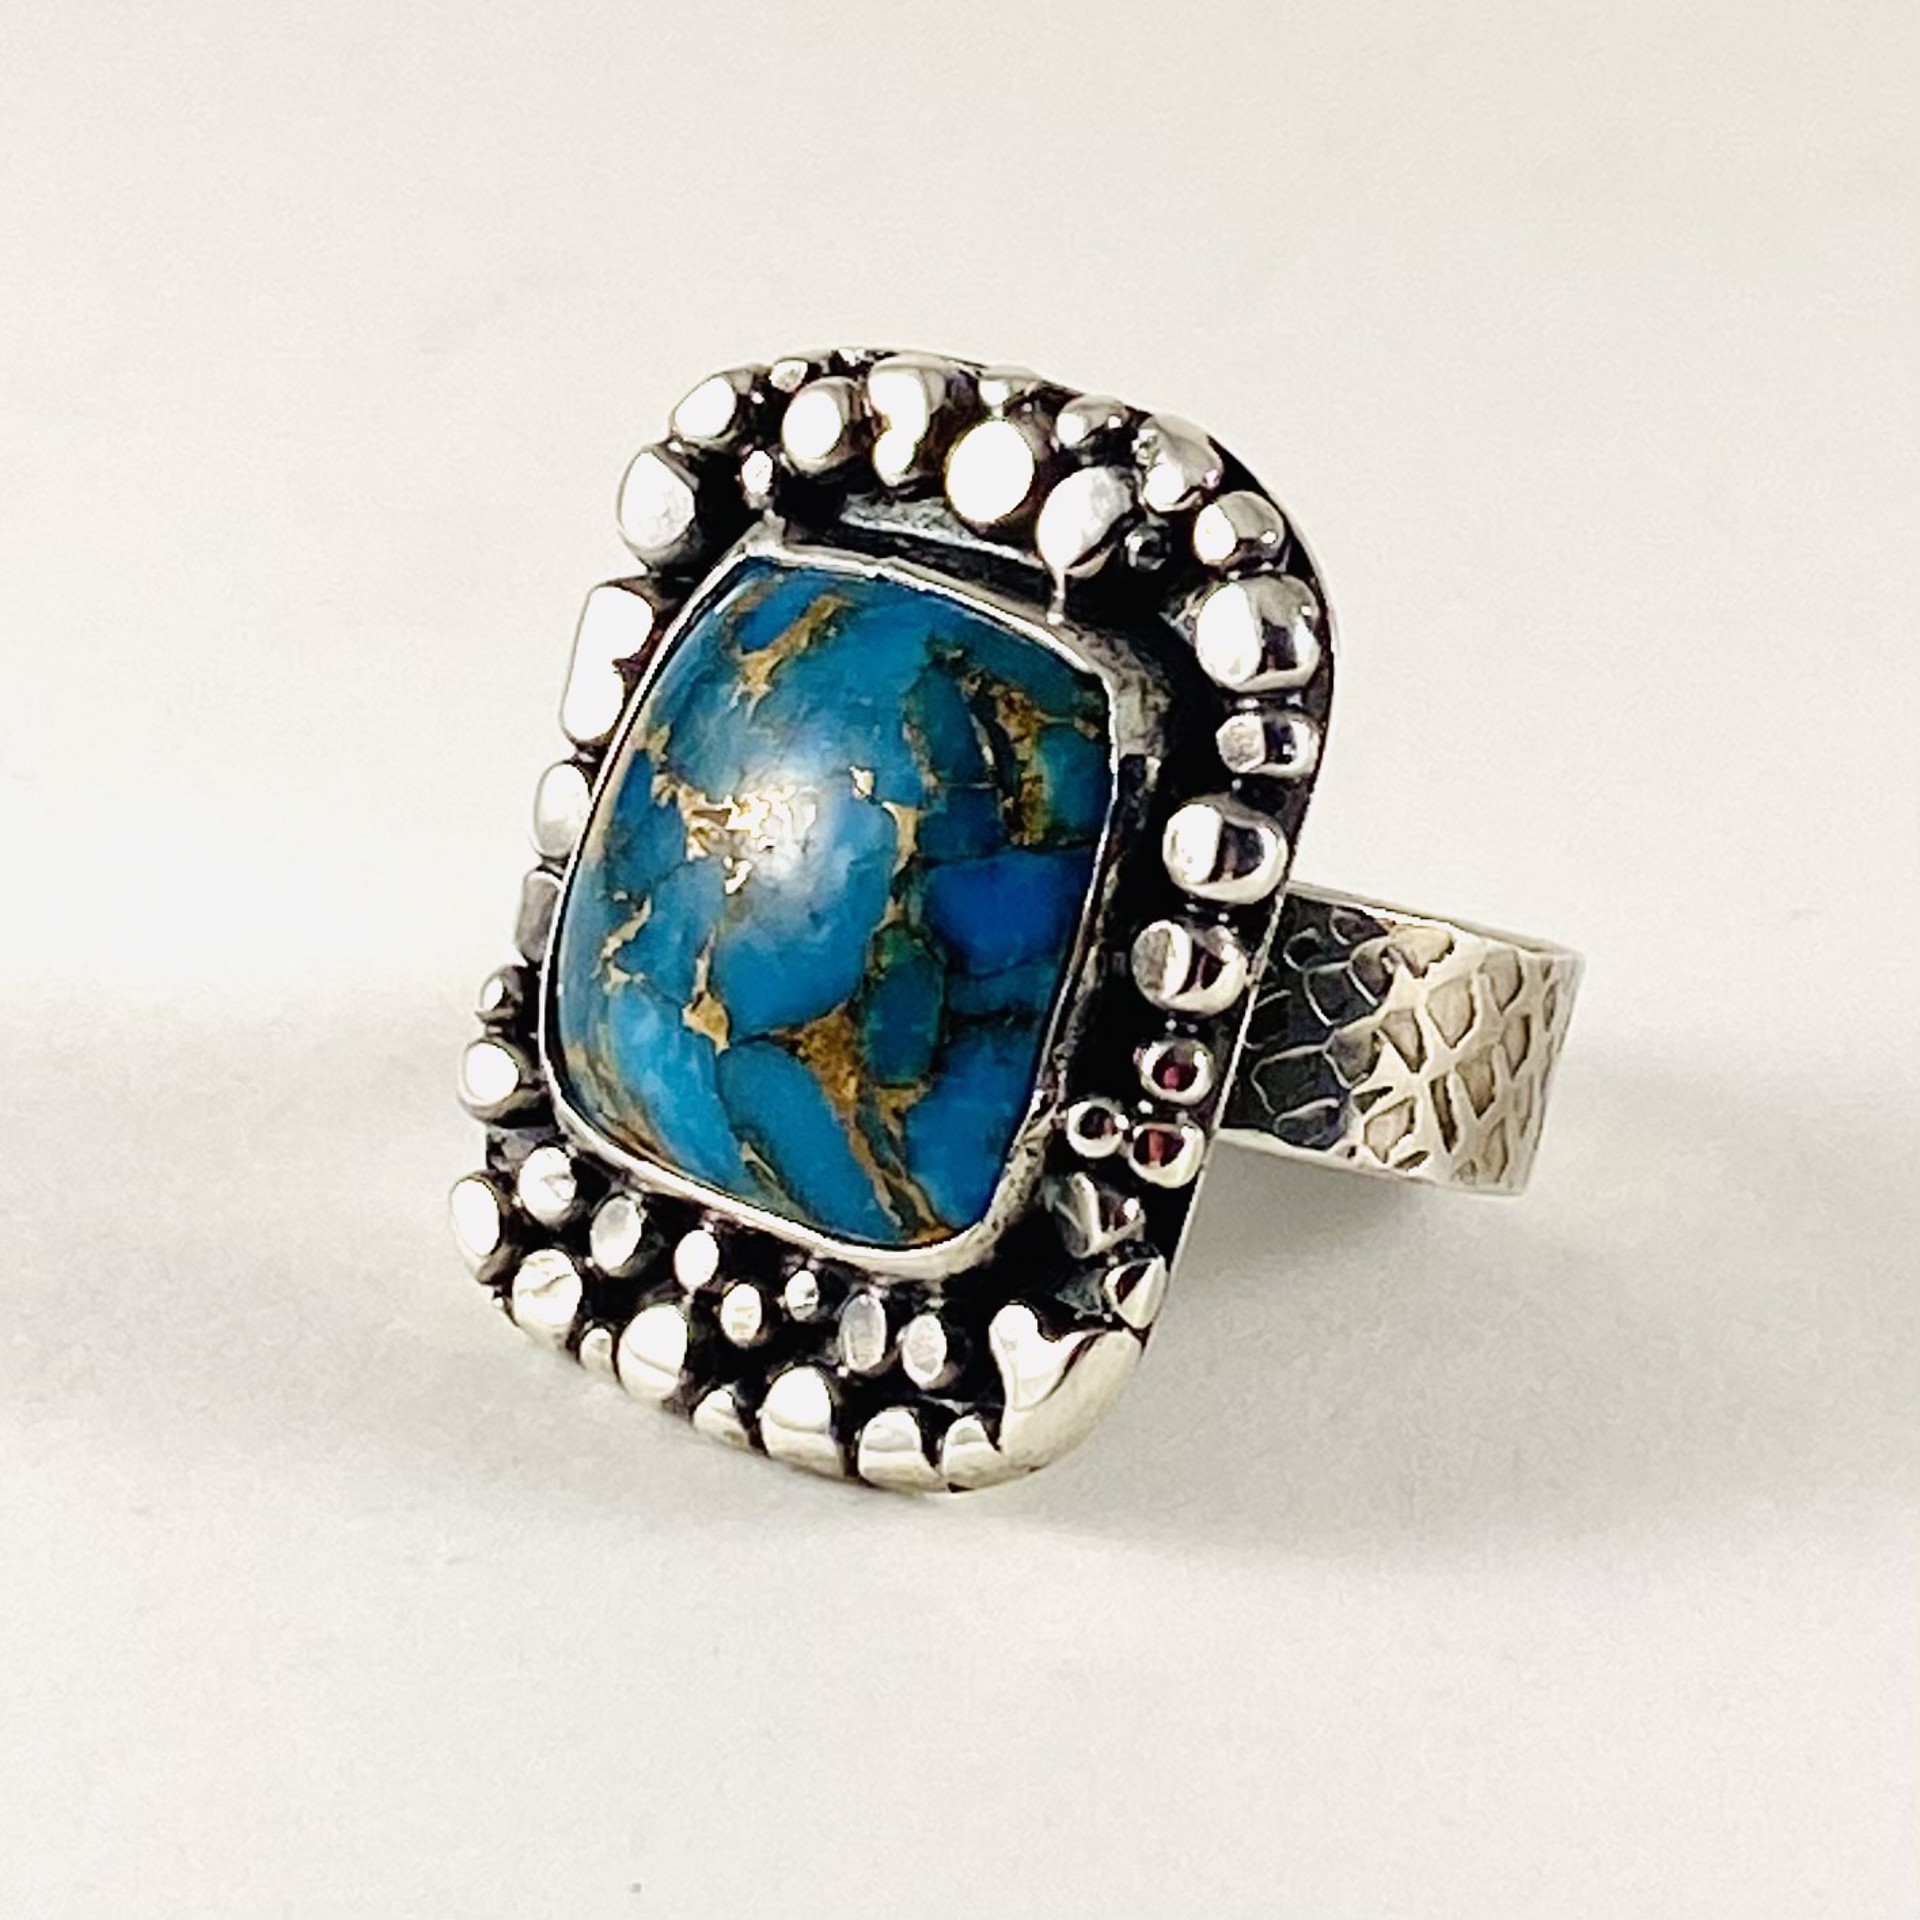 AB21-15 Turquoise and Bronze Composite Ring sz8 by Anne Bivens